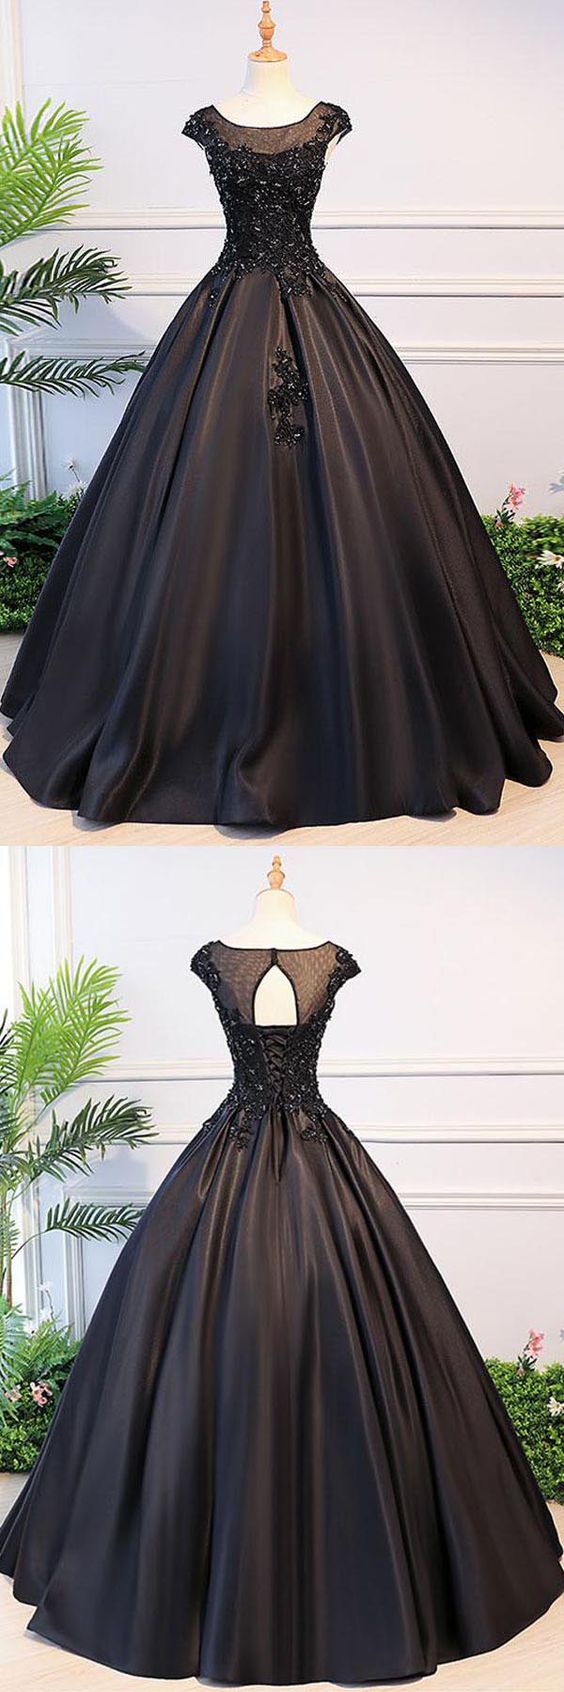 Black Ball Gown Illusion Neck Cap Sleeves Prom Dress,Graduation Ball Gown,GDC1233-Dolly Gown